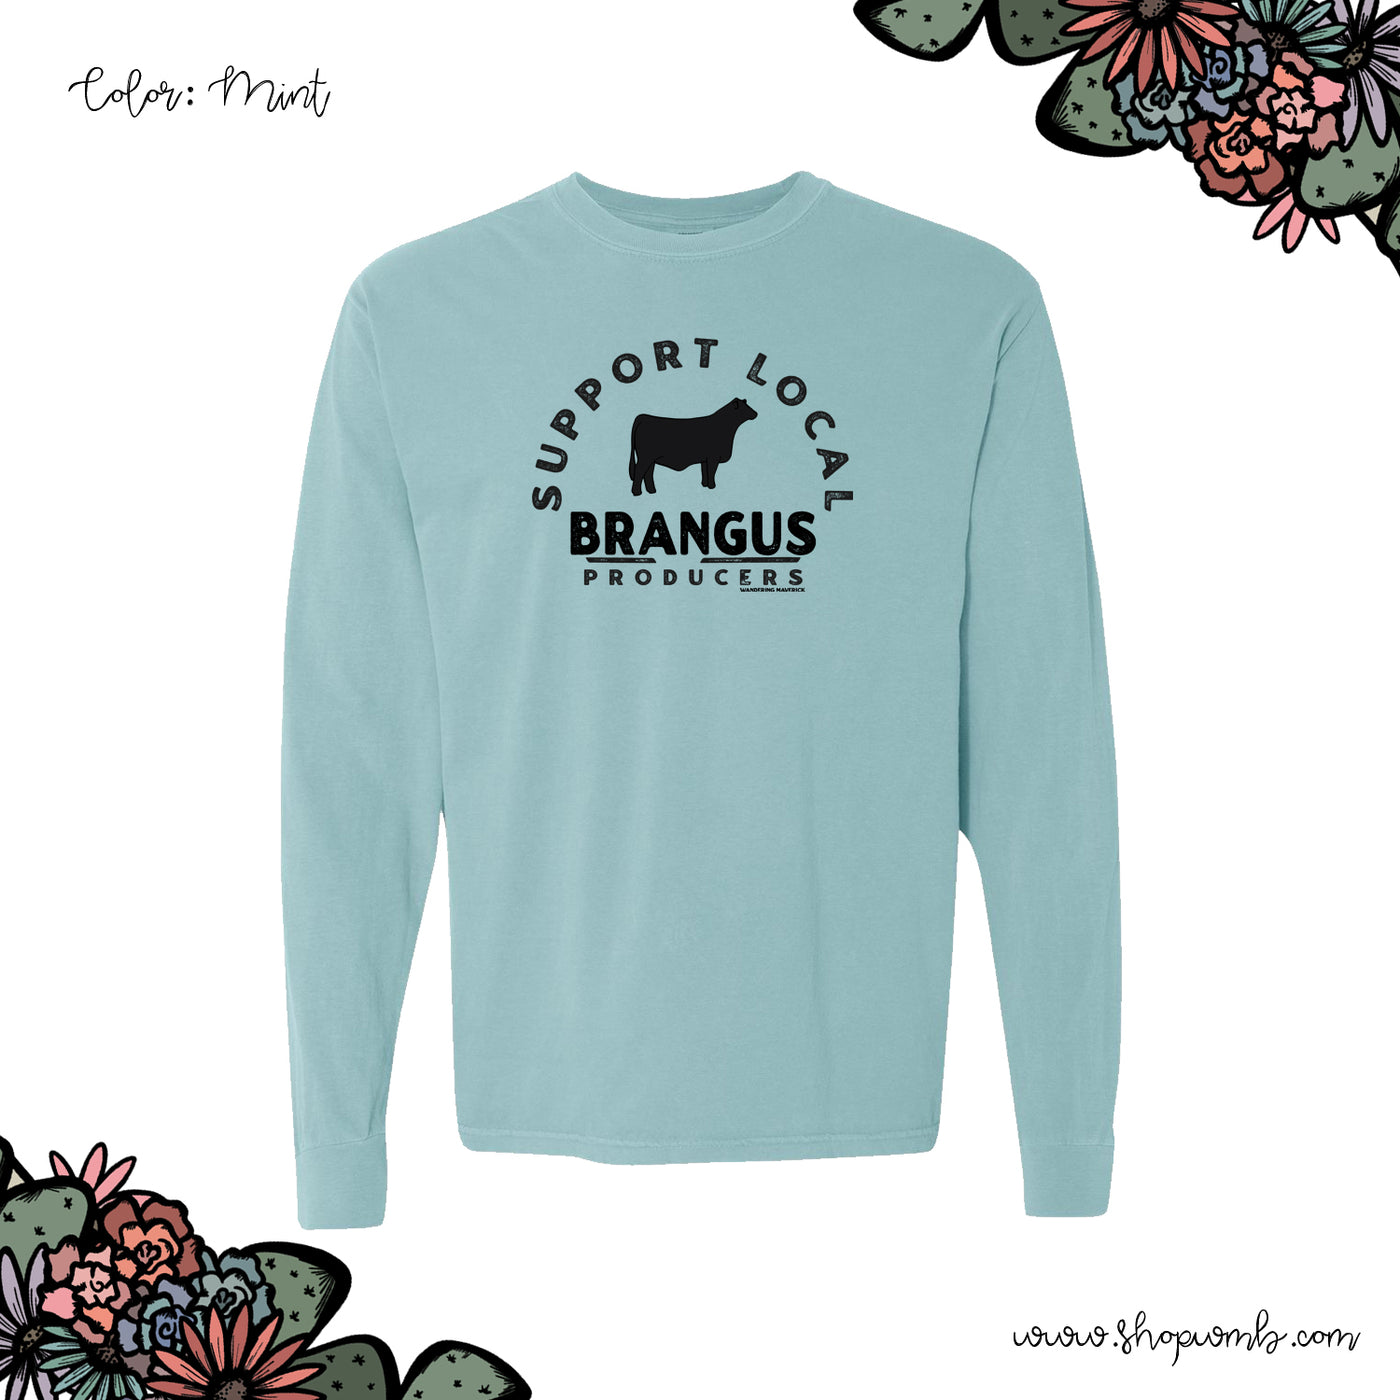 Support Local Brangus Producers LONG SLEEVE T-Shirt (S-3XL) - Multiple Colors!